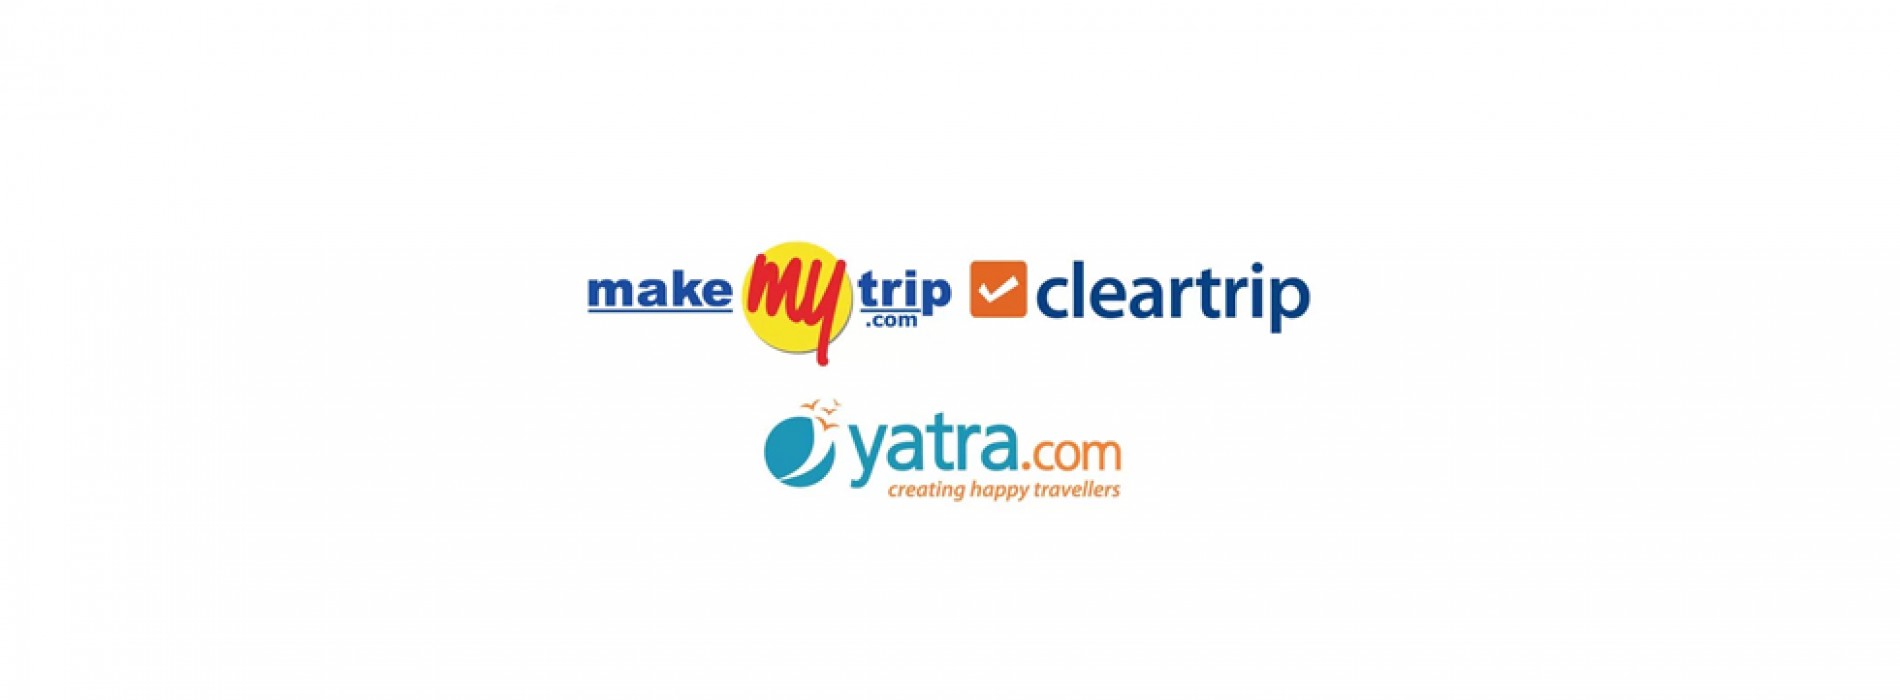 Online travel portals line up freebies to woo customers